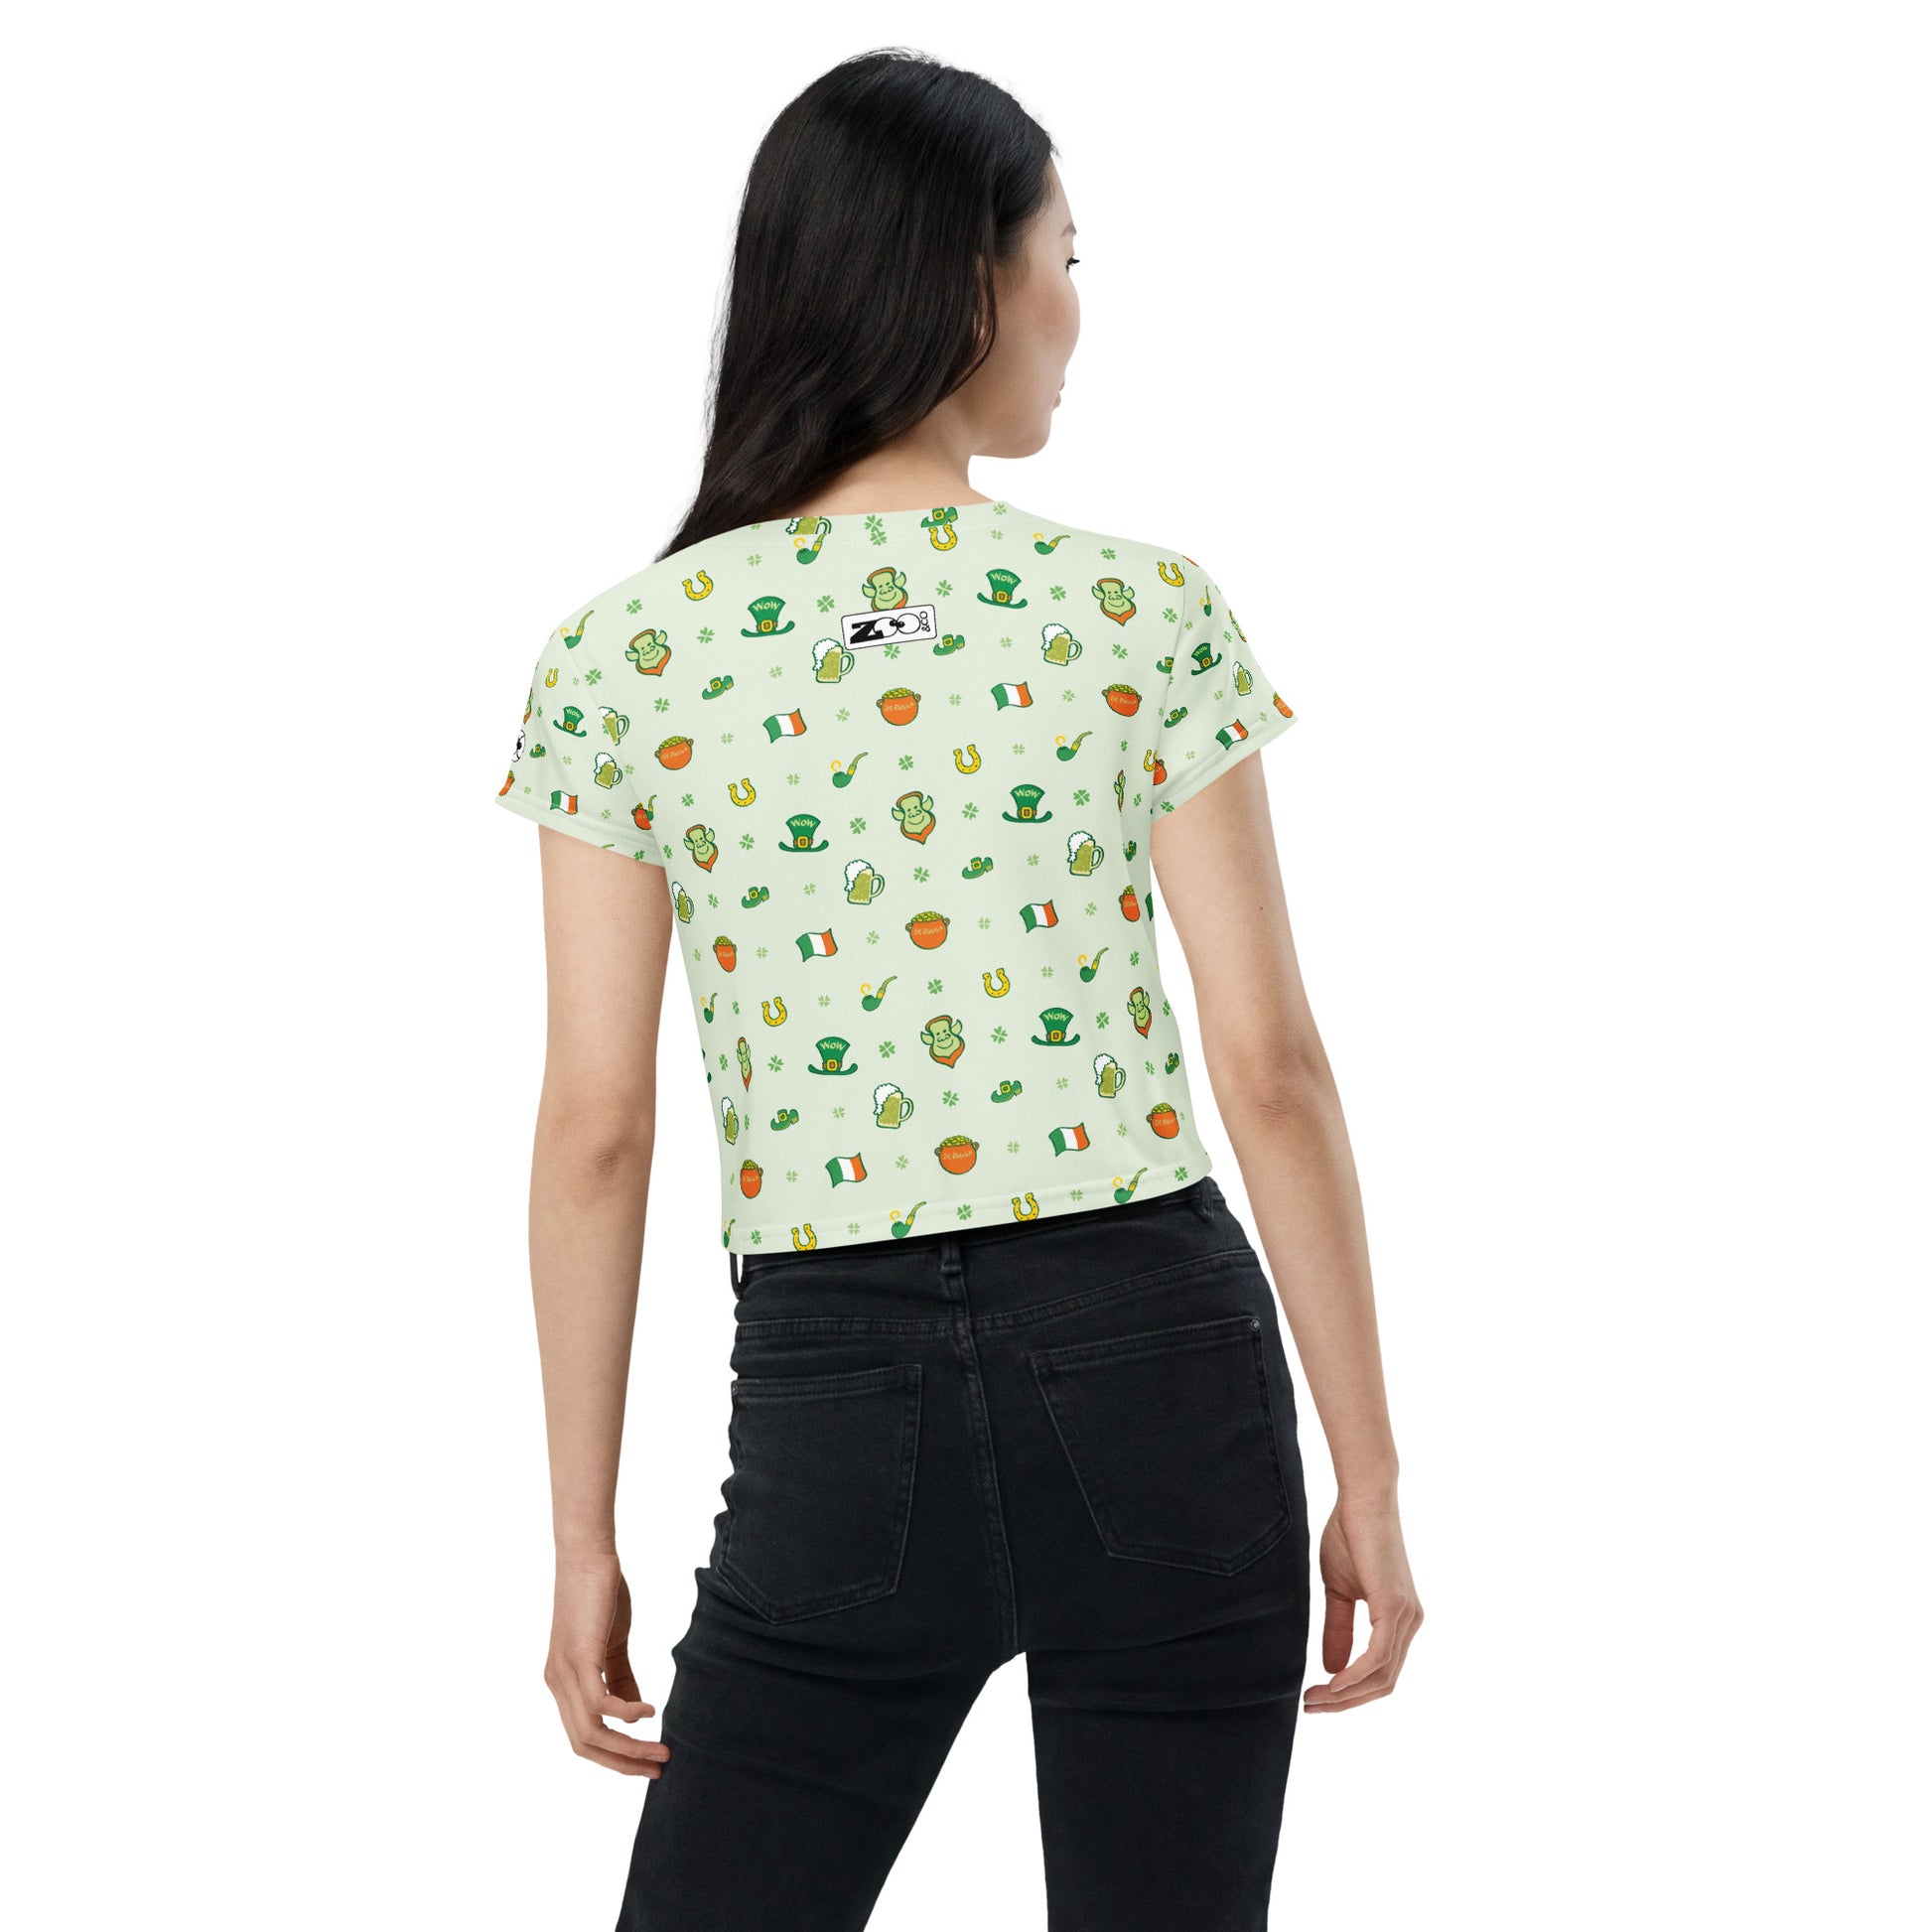 Celebrate Saint Patrick's Day in style All-Over Print Crop Tee. Back view